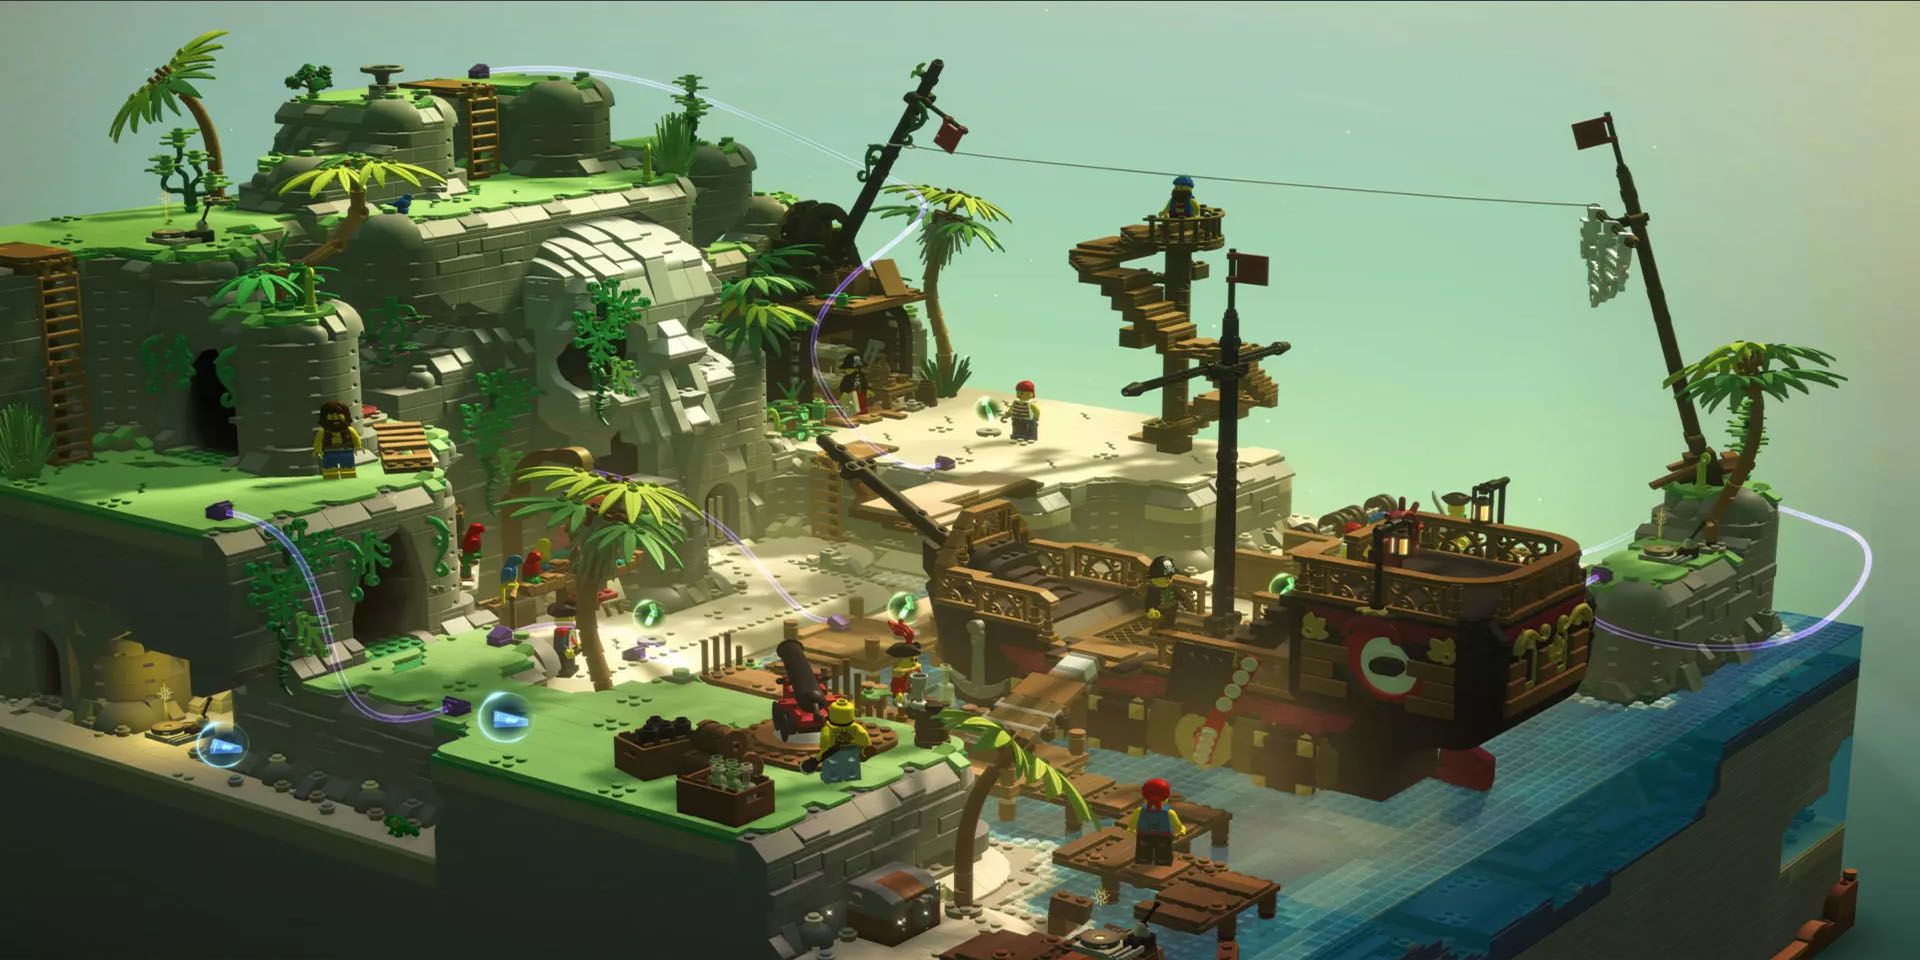 Lego Bricktales pirate themed isometric island showing off player made creations such as staircases and a pirate boat